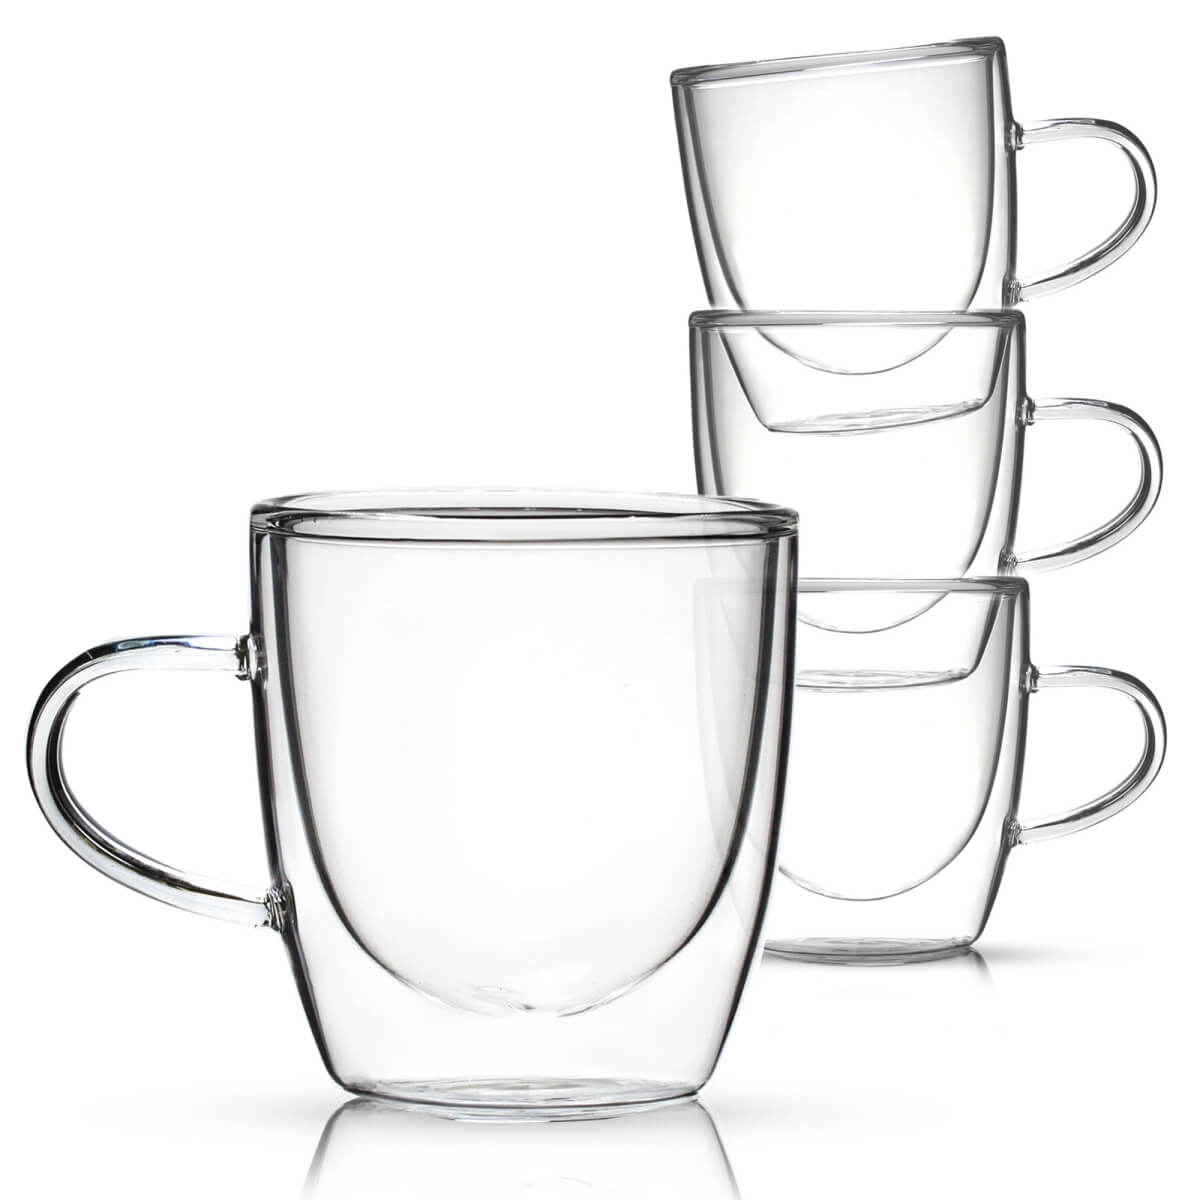 5 oz Double Walled Glass with Handle - Kitchables